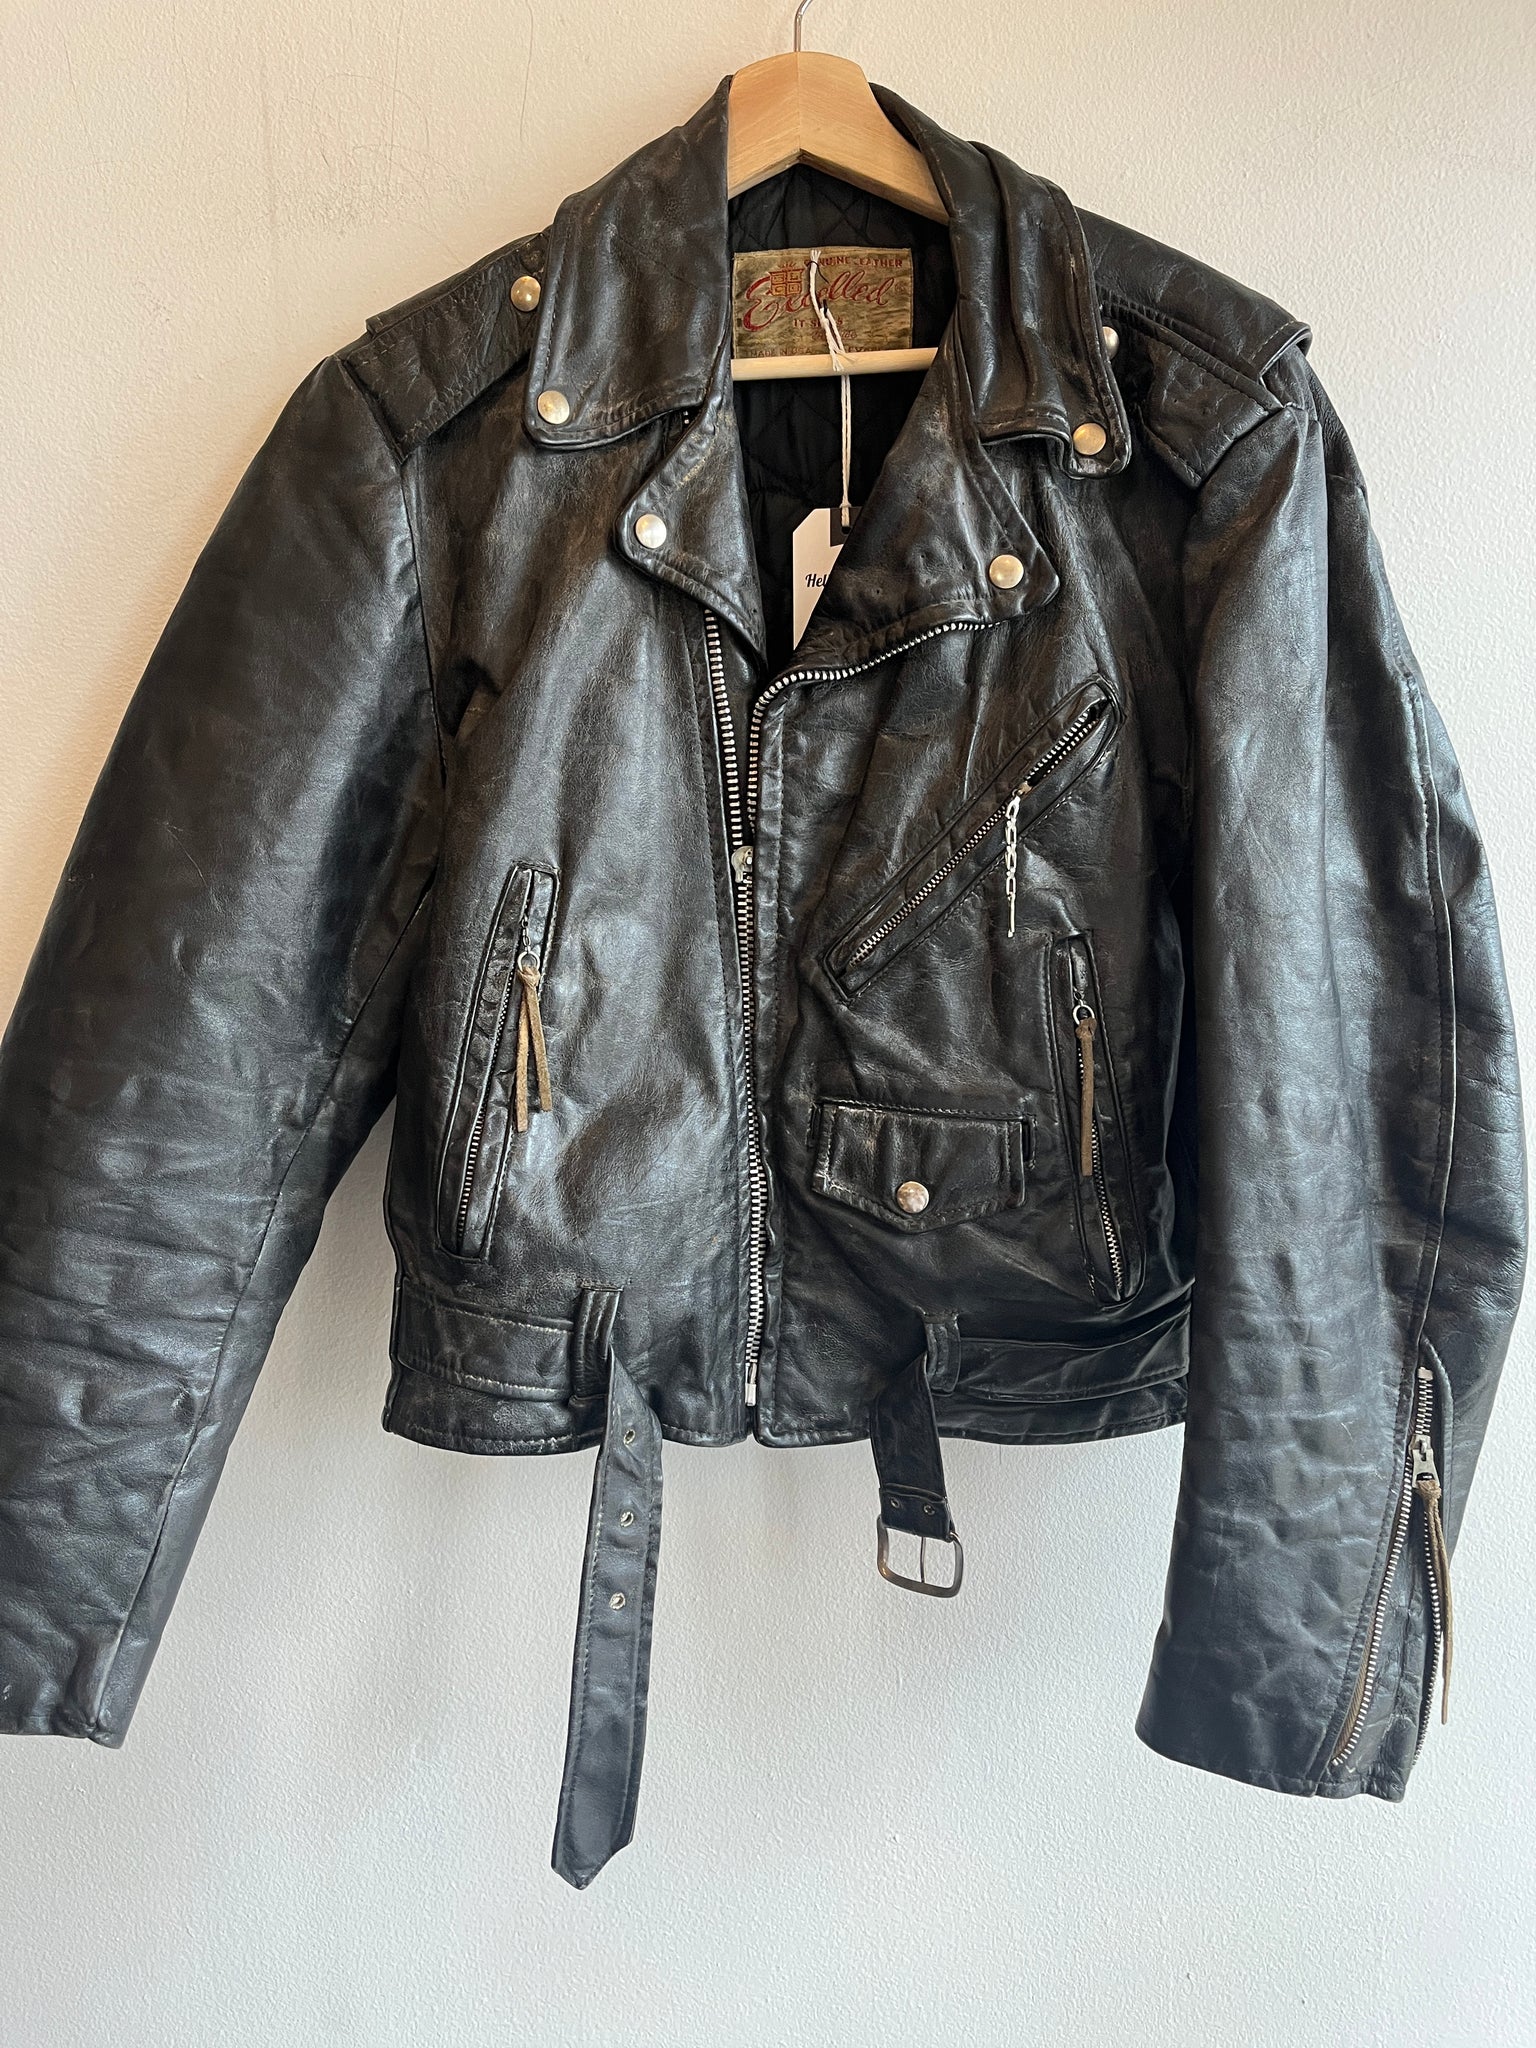 Vintage 1960’s Excelled Leather Motorcycle Jacket